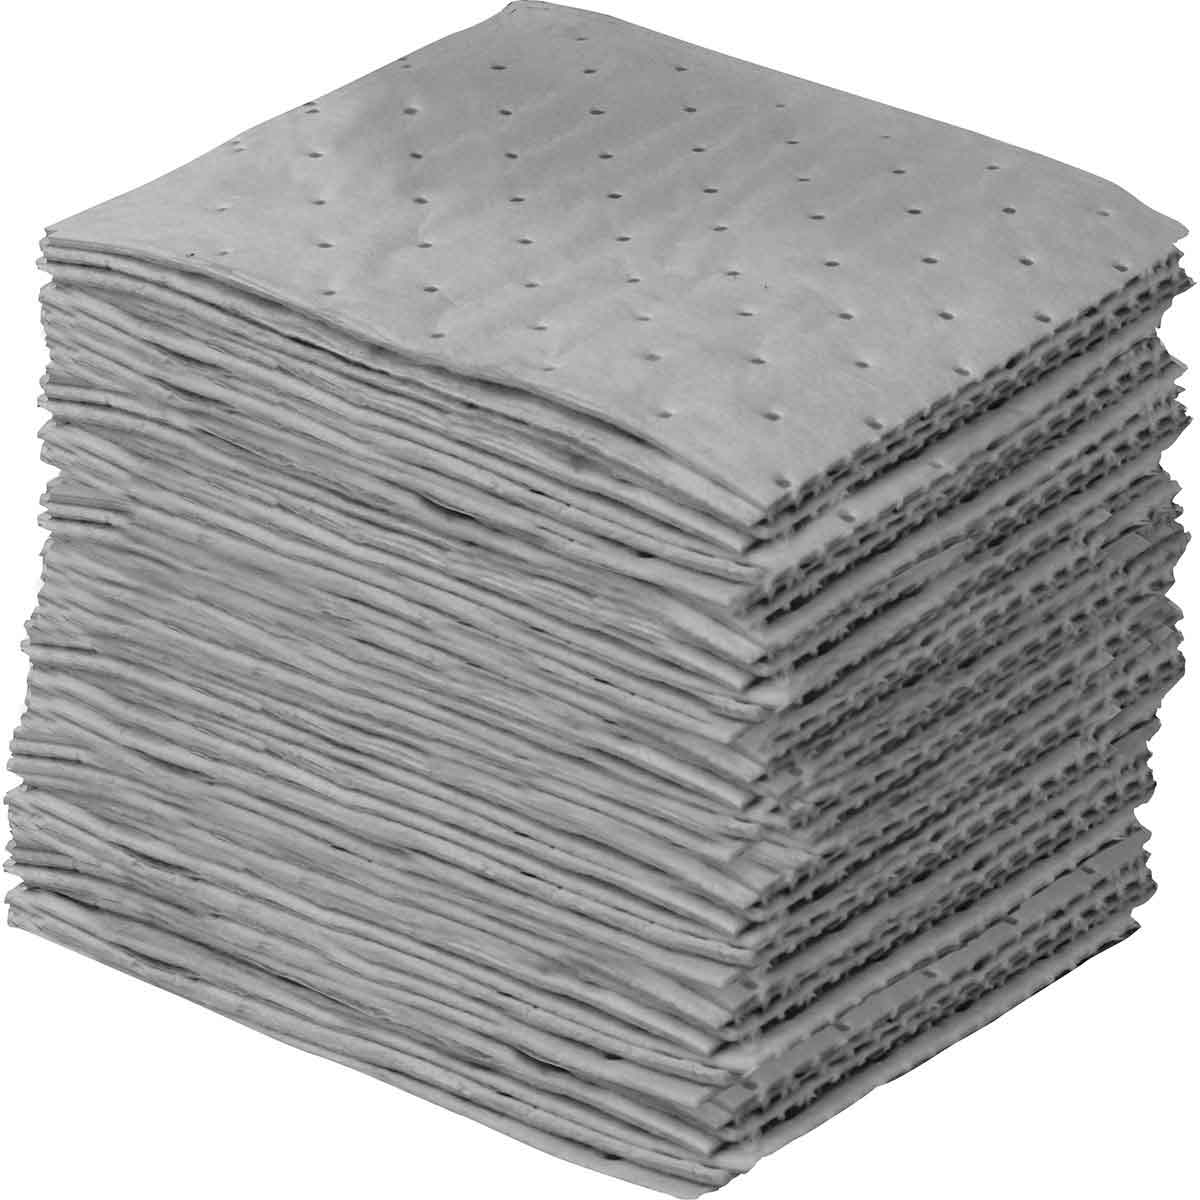 15 x 19 Universal Middle Weight Absorbent Pad - Spill Kit